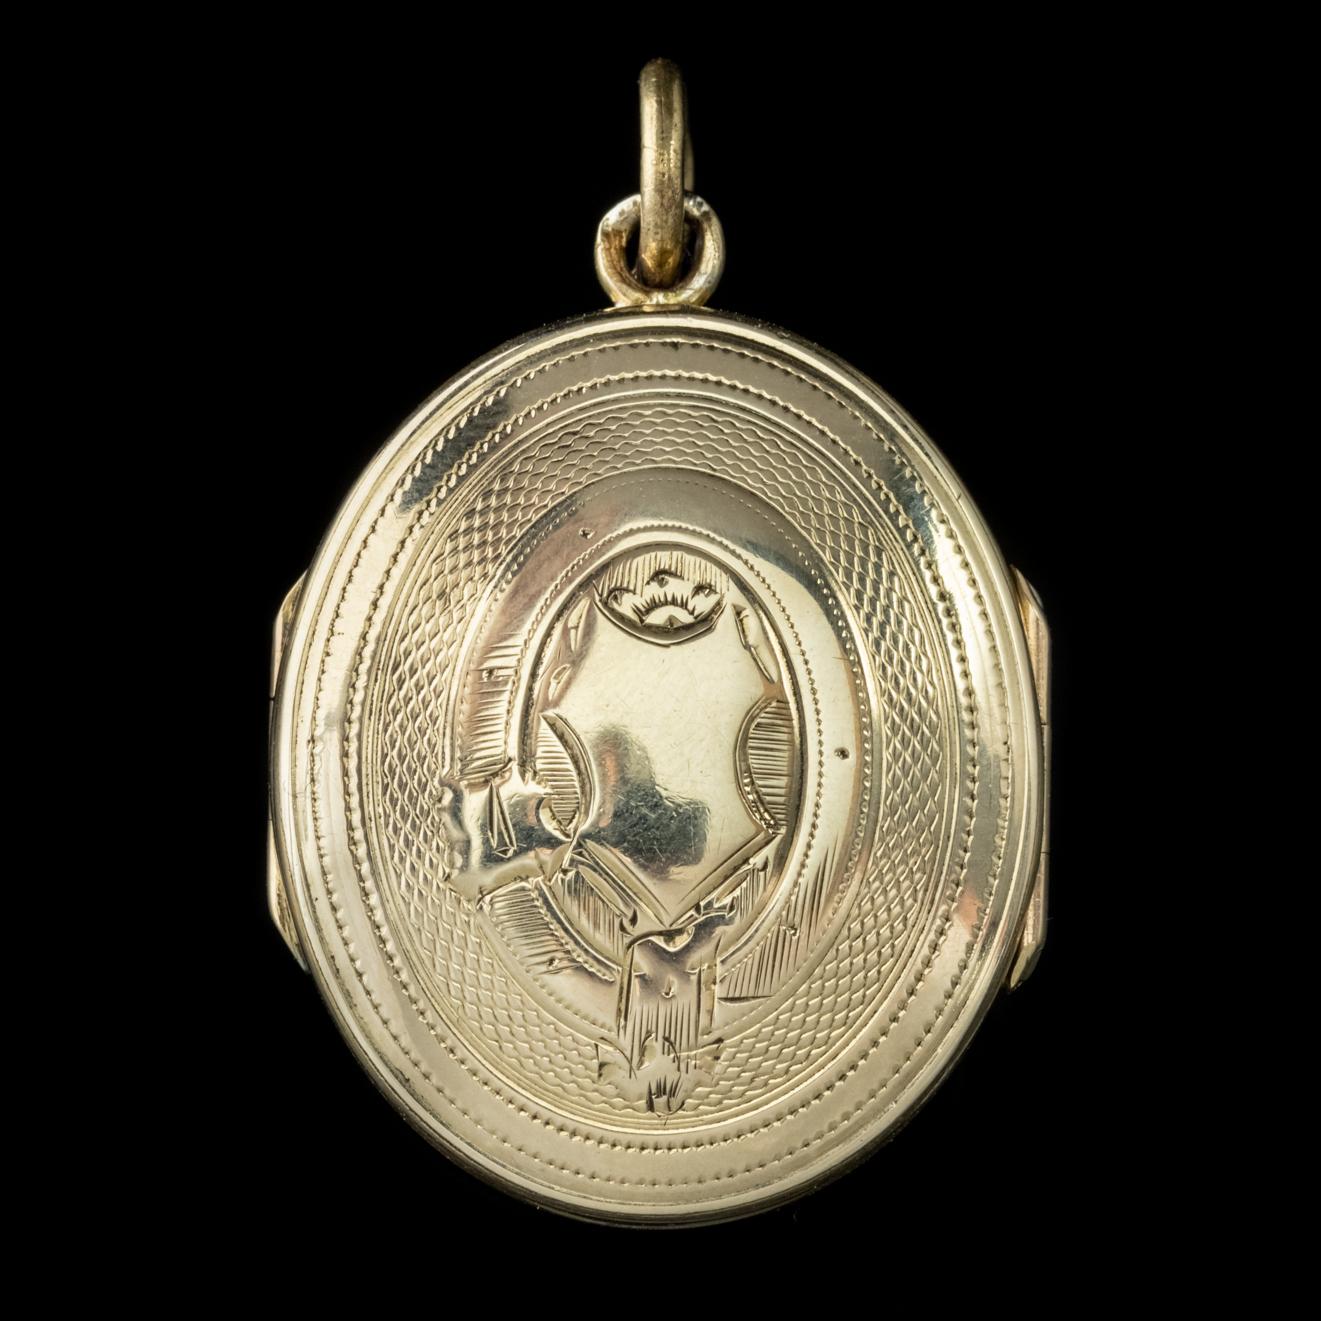 An exquisite Antique Victorian family locket modelled in 9ct Yellow Gold featuring detailed engraved patterning on the front and back with two central shields in which initials can be added. 

A belt and buckle can be seen encircling the central